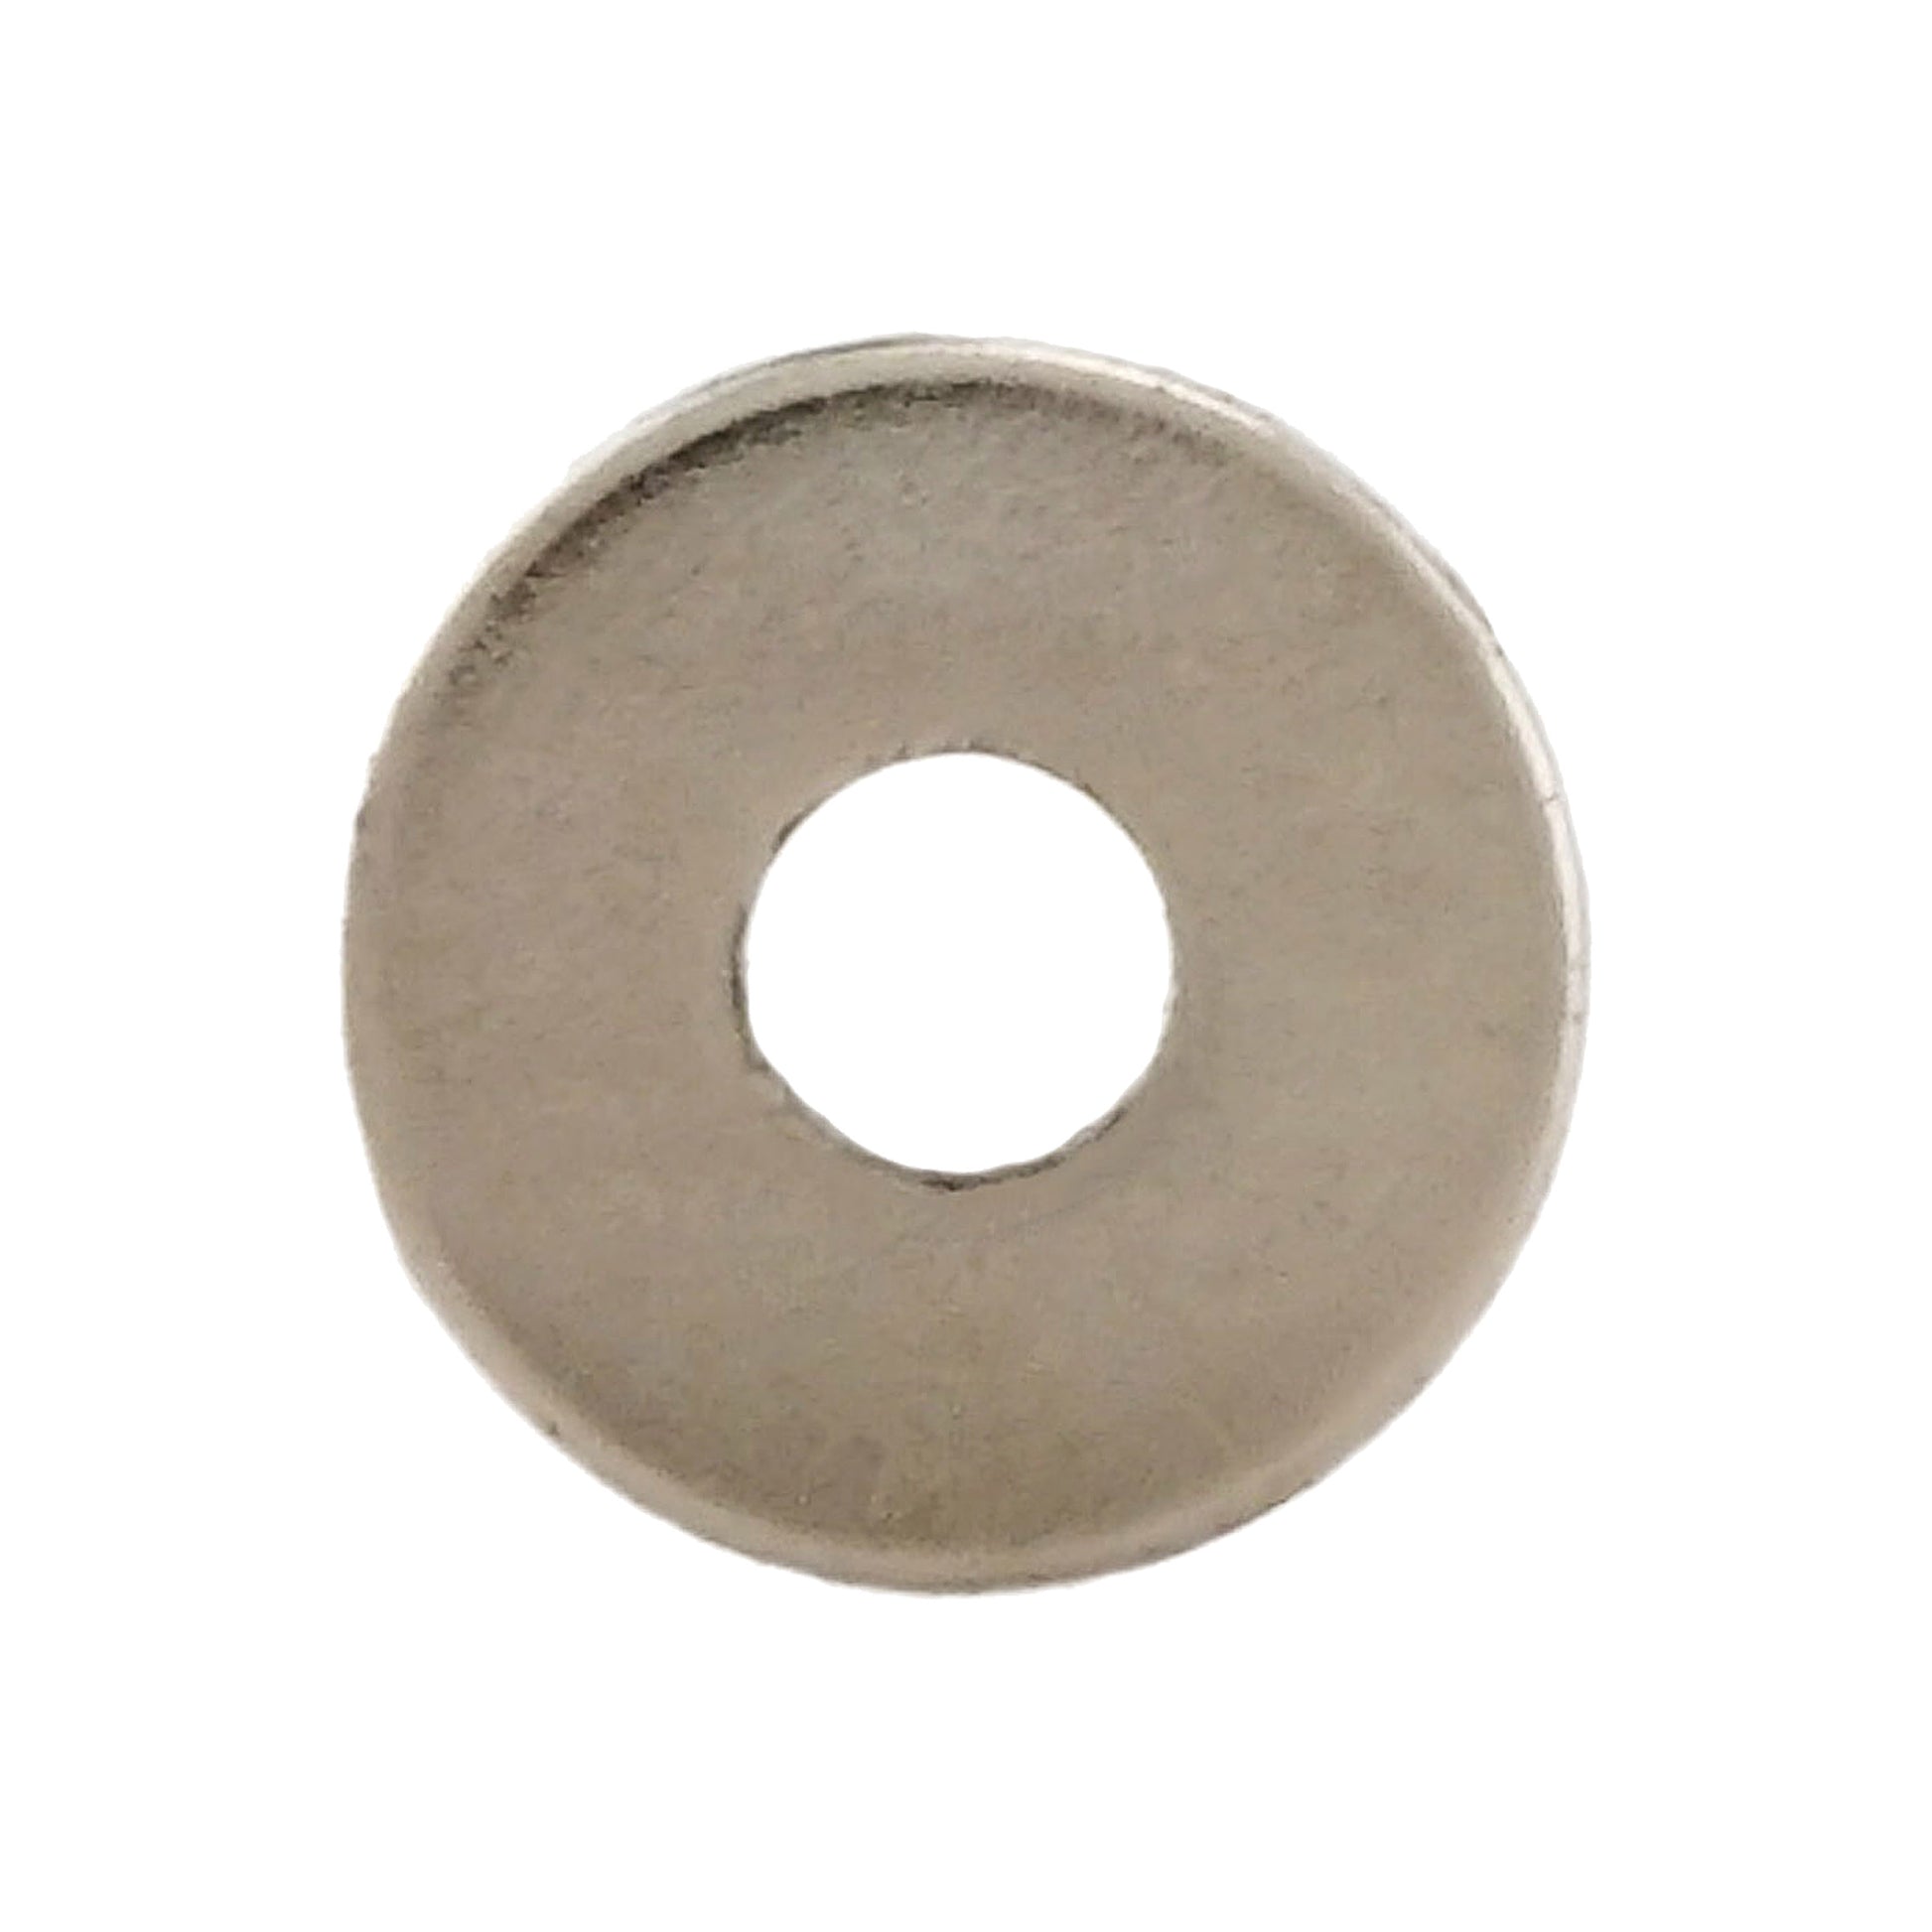 Load image into Gallery viewer, NR003719NS01 Neodymium Ring Magnet - Top View